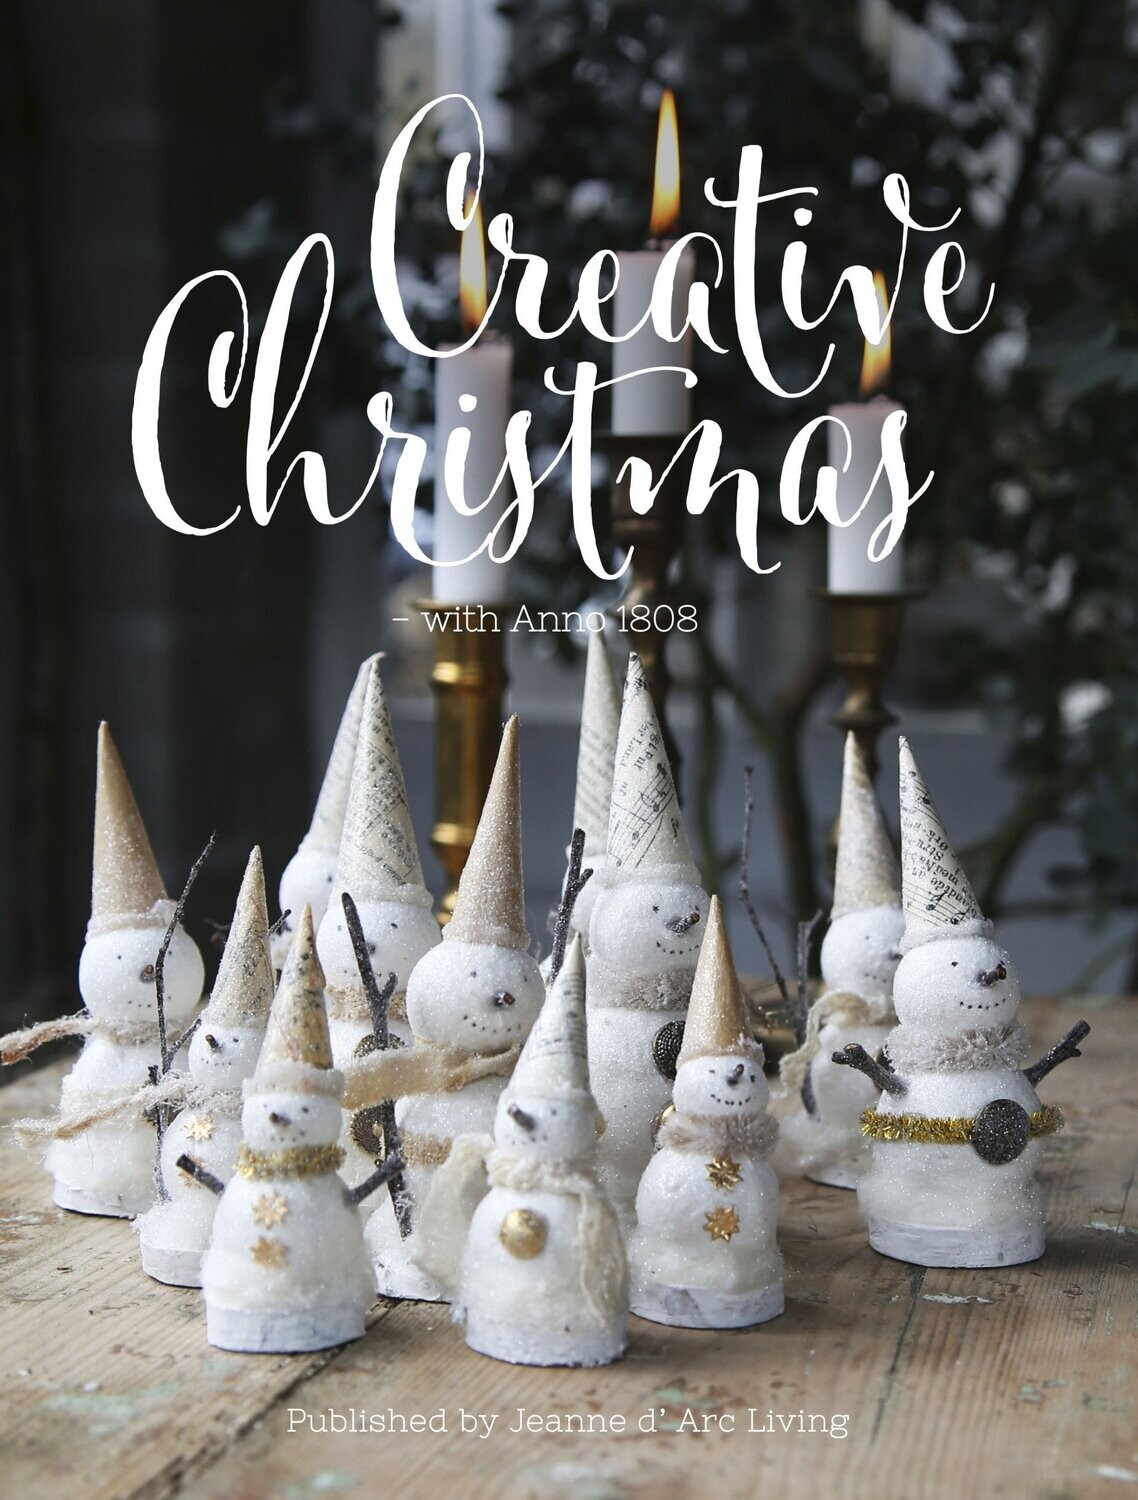 Creative Christmas Book from Jeanne d'Arc Living New!